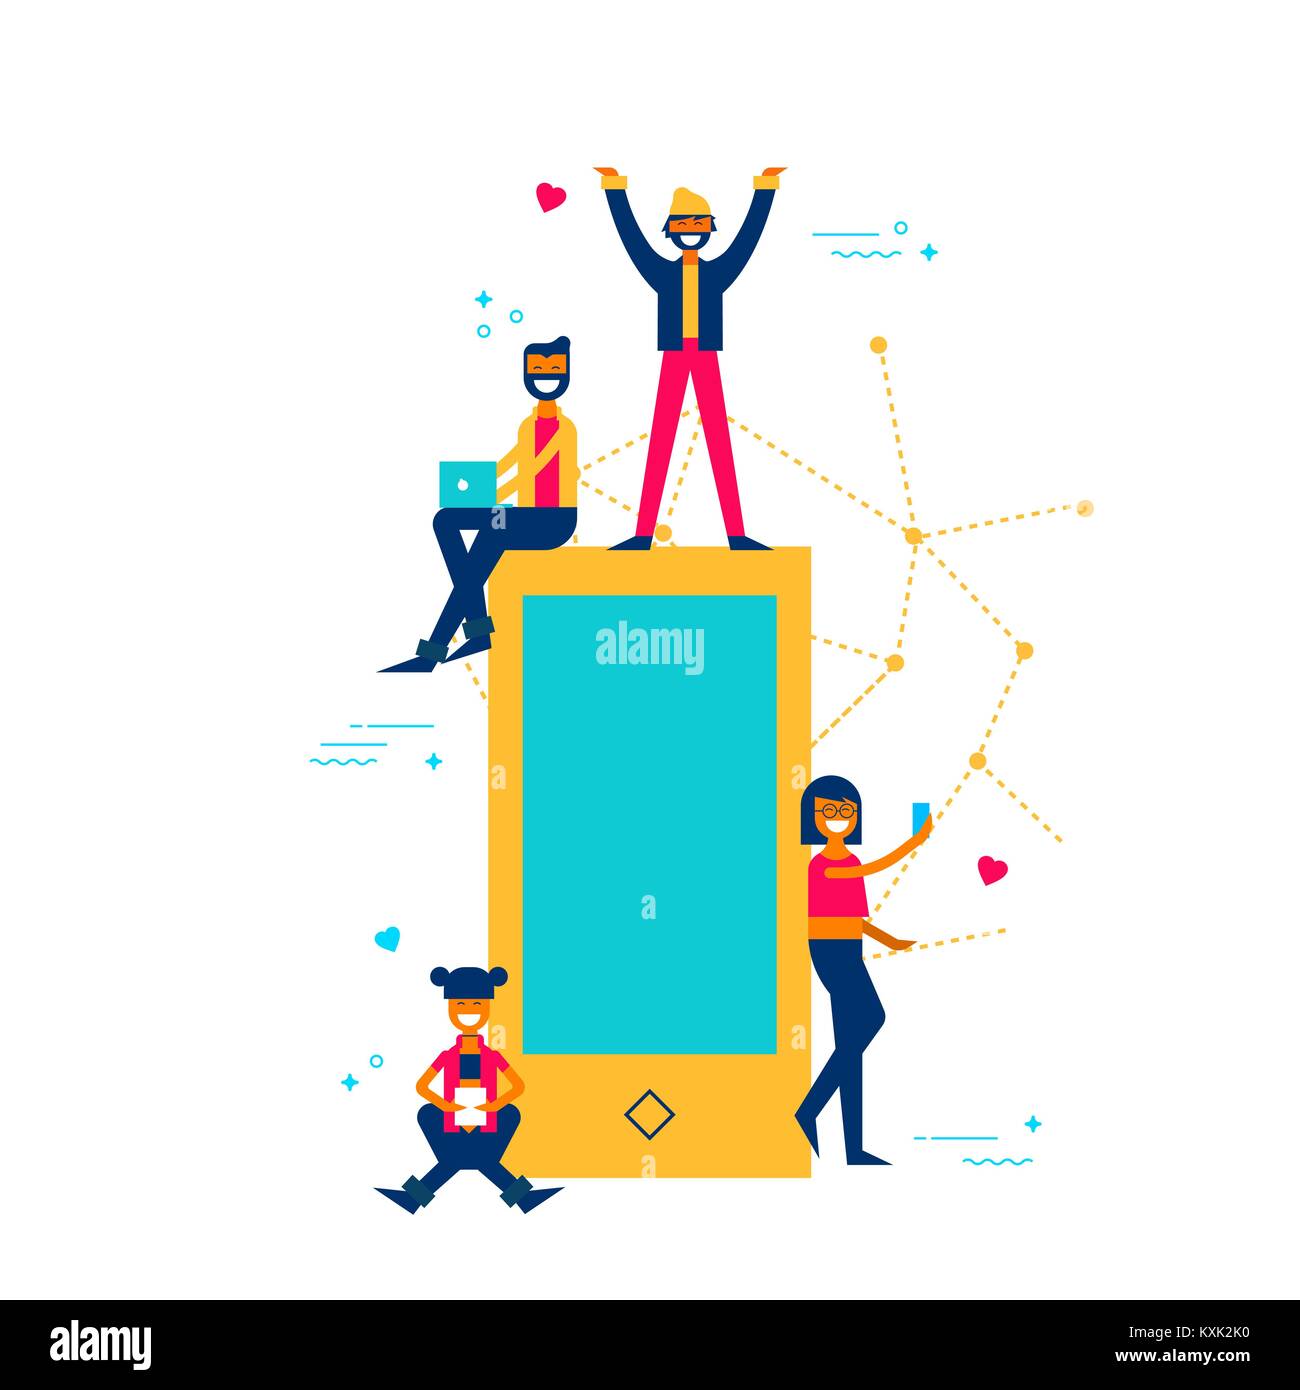 Internet phone connection concept illustration, group of young people using social media to connect together on mobile. EPS10 vector. Stock Vector